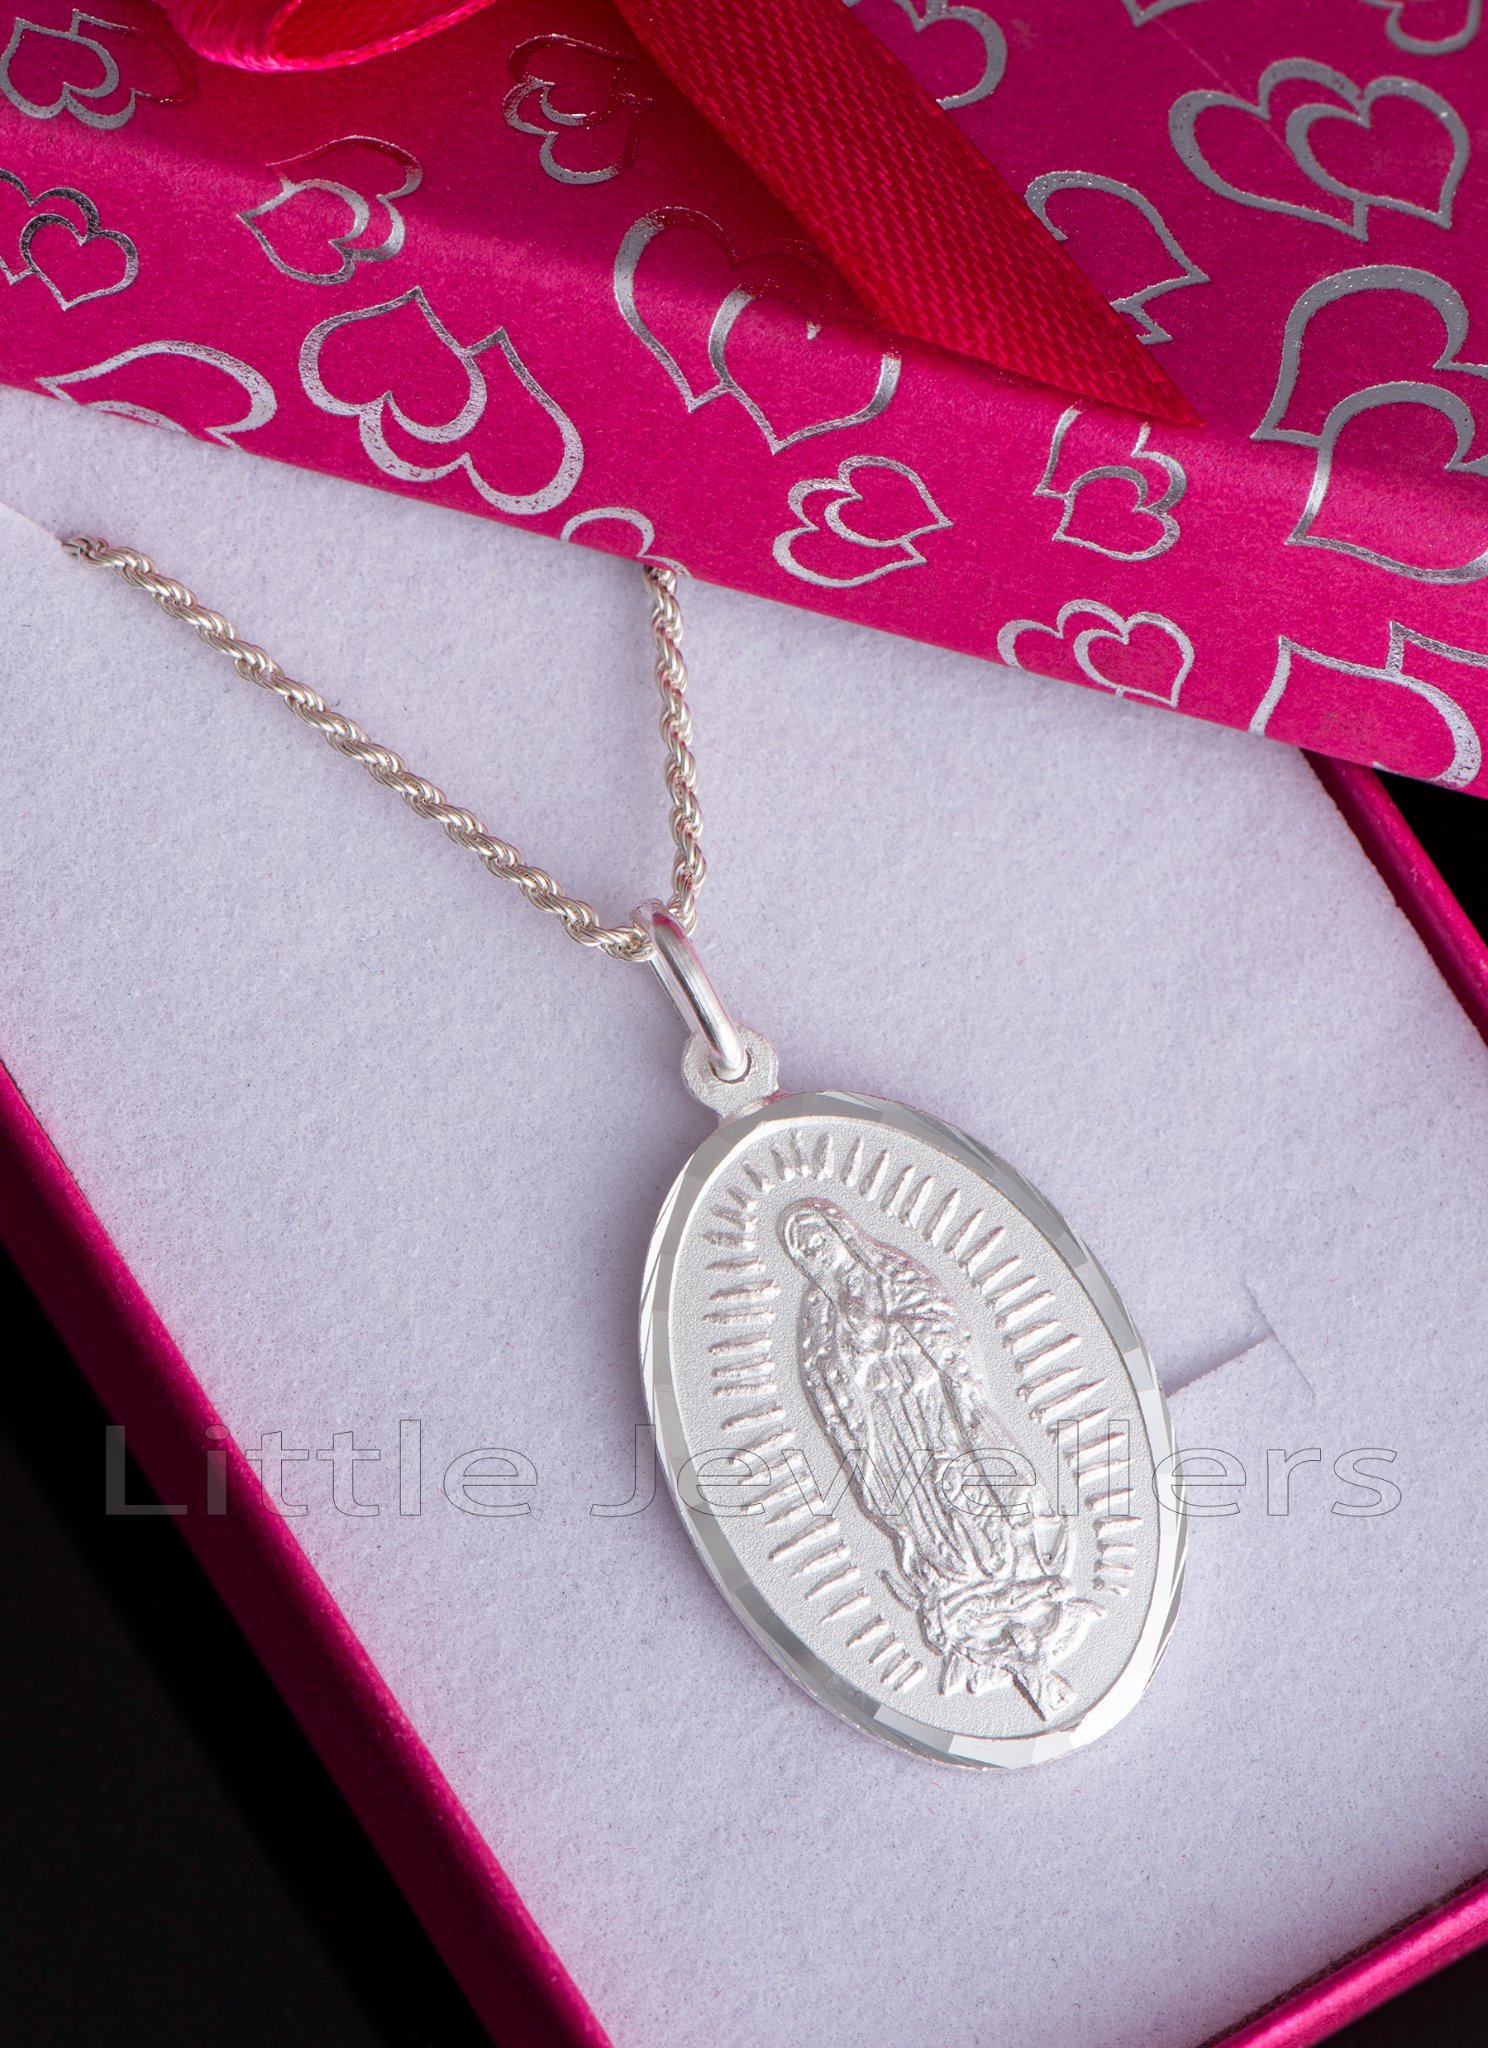 ChicSilver Virgin Mary Necklace 925 Sterling Silver Miraculous Medal Oval Pendant  Catholic Religious Christian Jewelry - Walmart.com